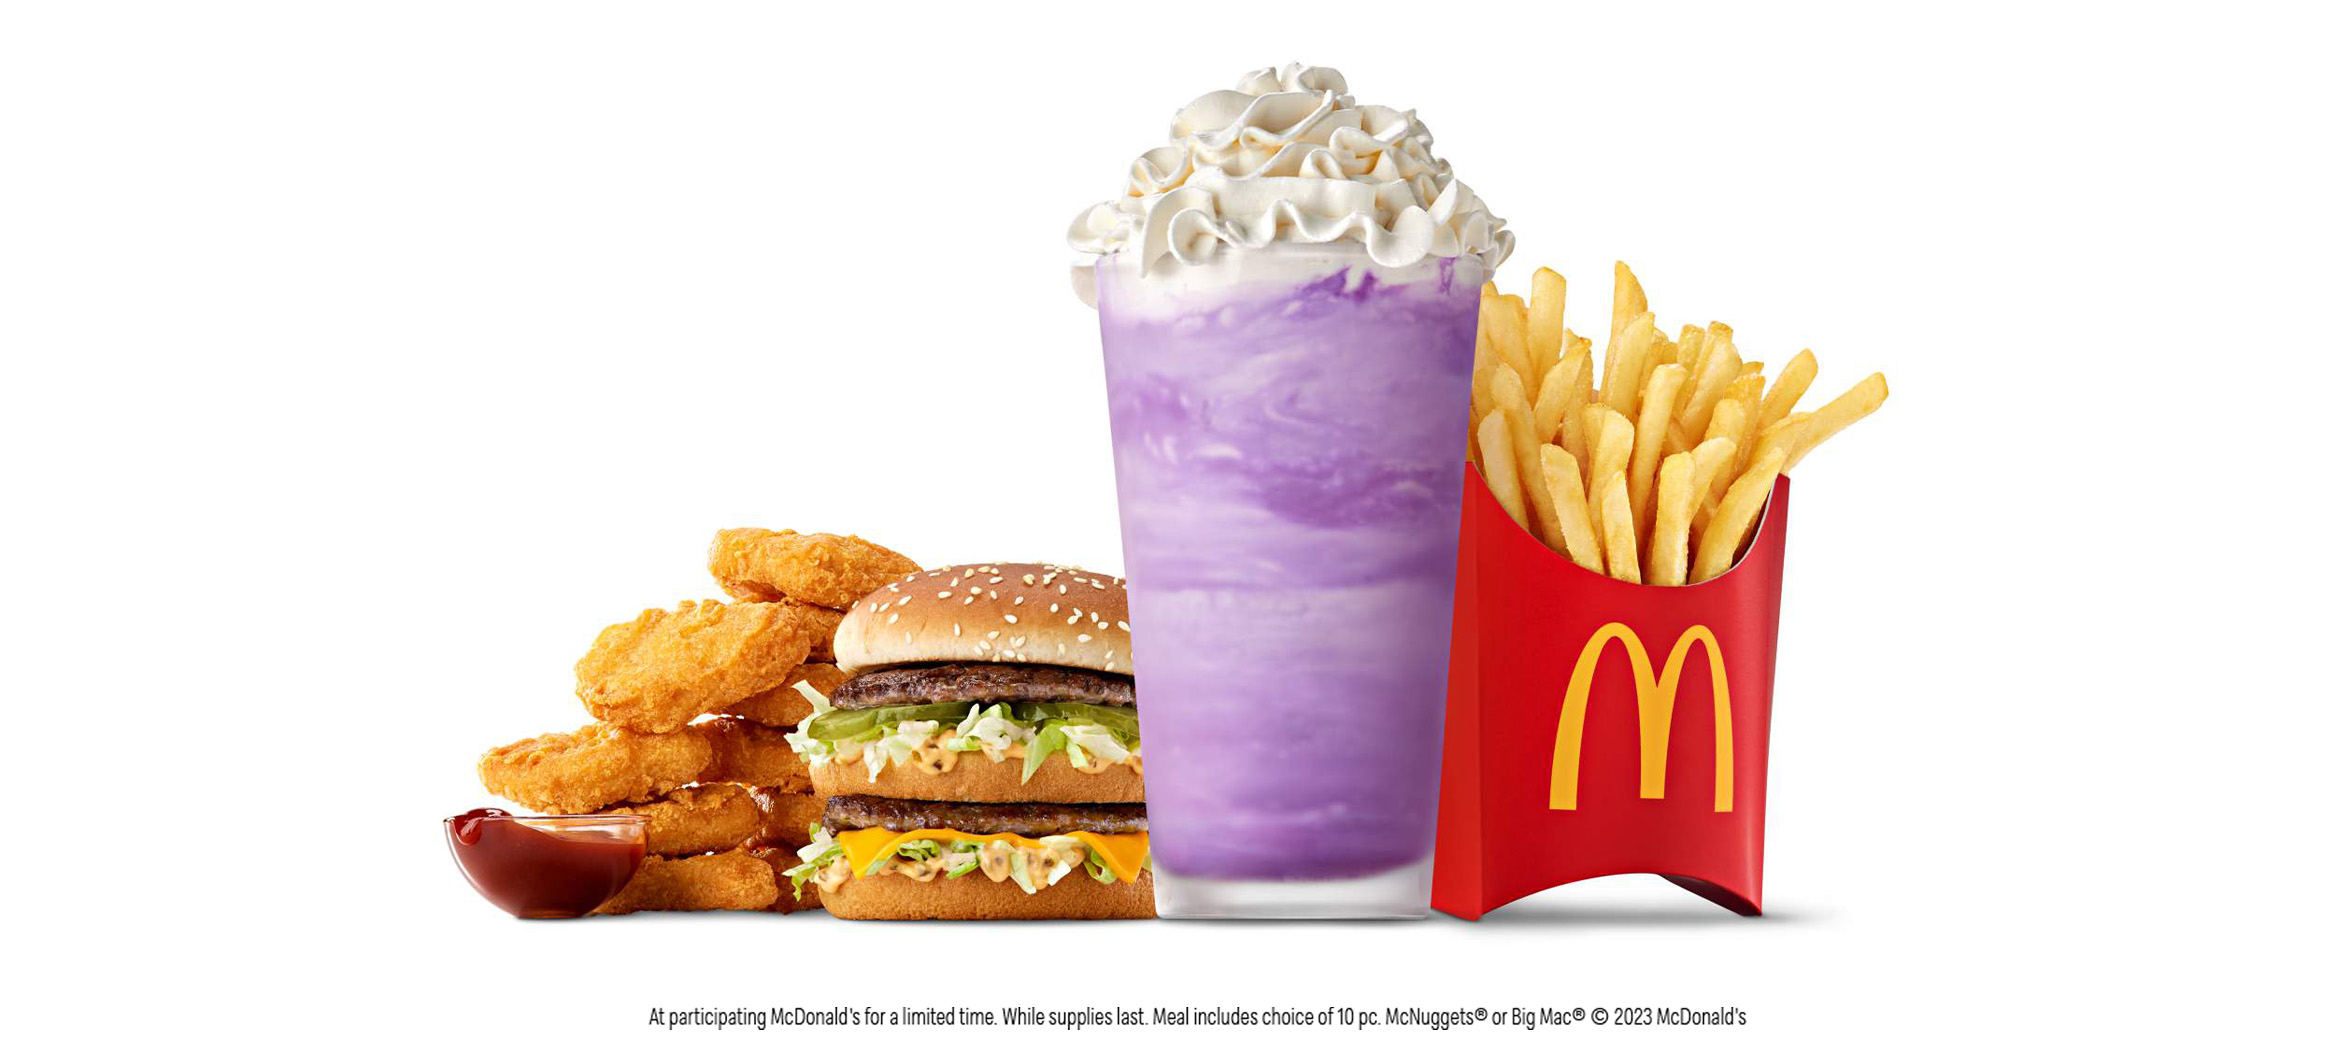 The Grimace Meal and Shake